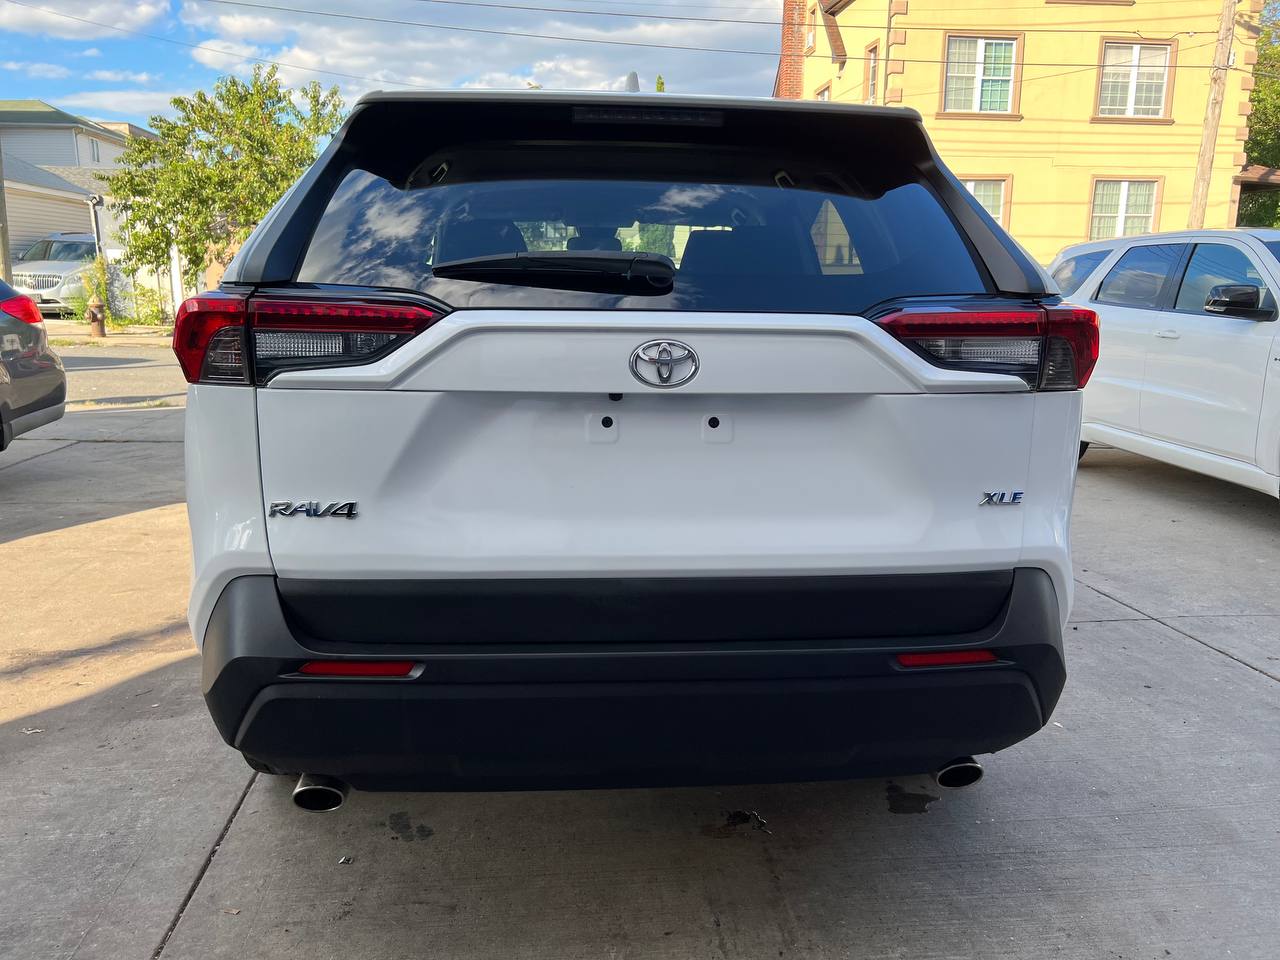 Used - Toyota RAV4 XLE SUV for sale in Staten Island NY